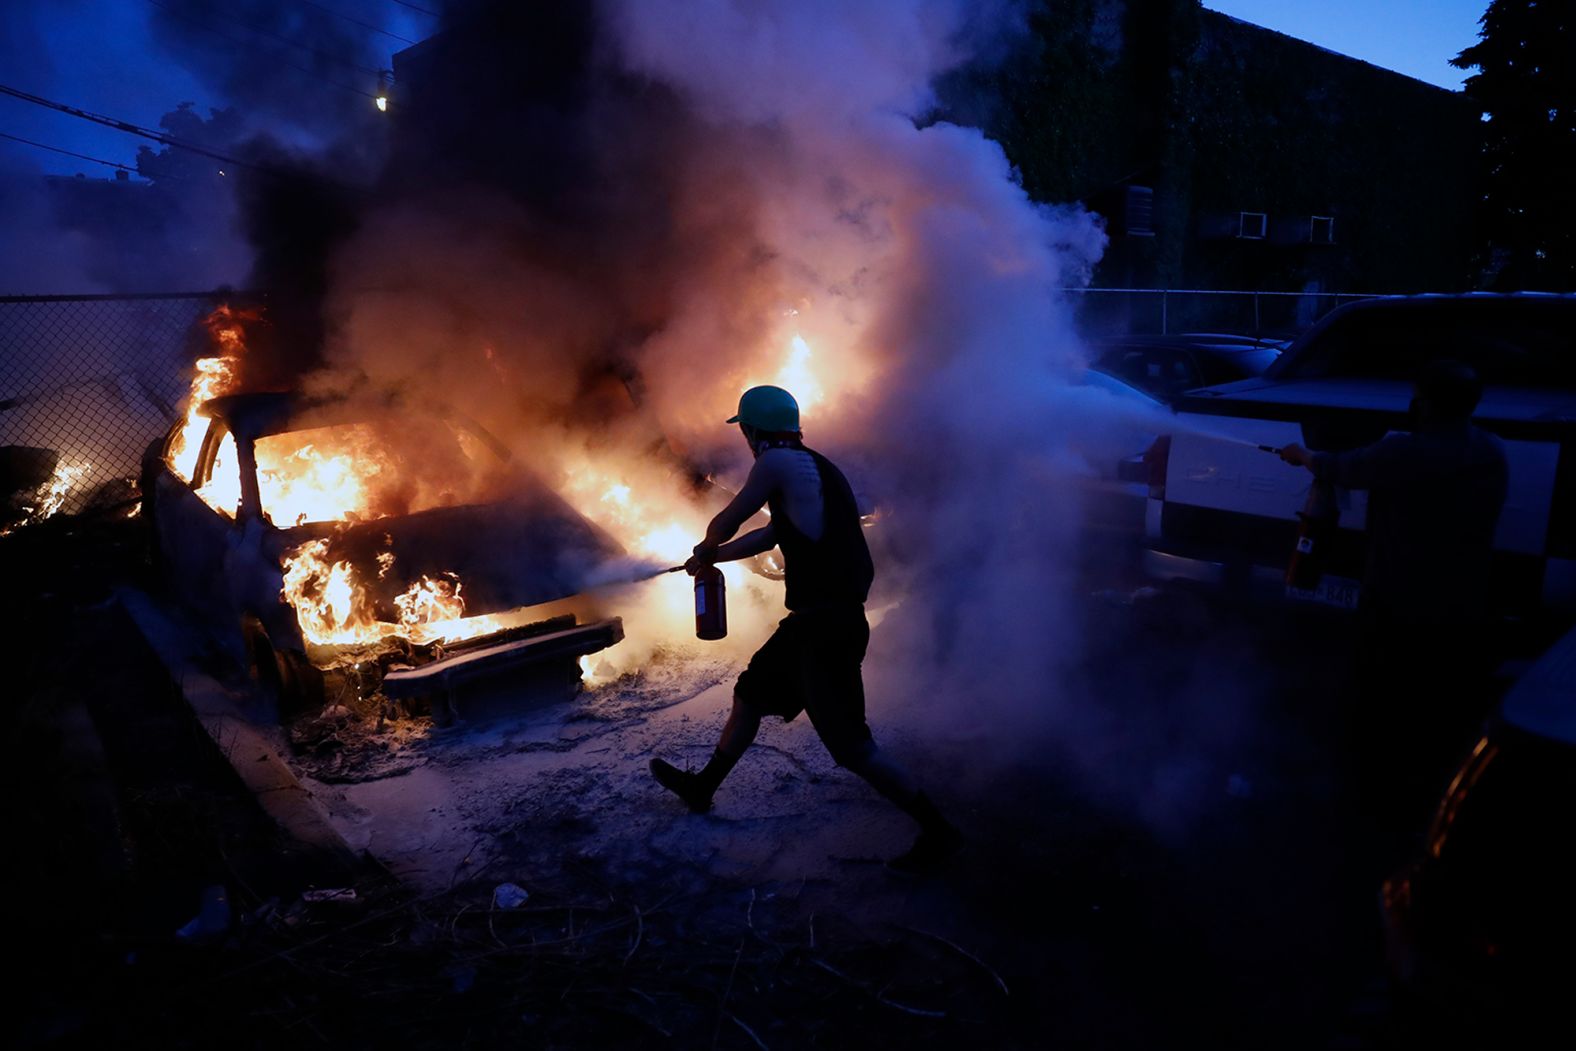 People in Minneapolis try to extinguish burning cars on May 29.